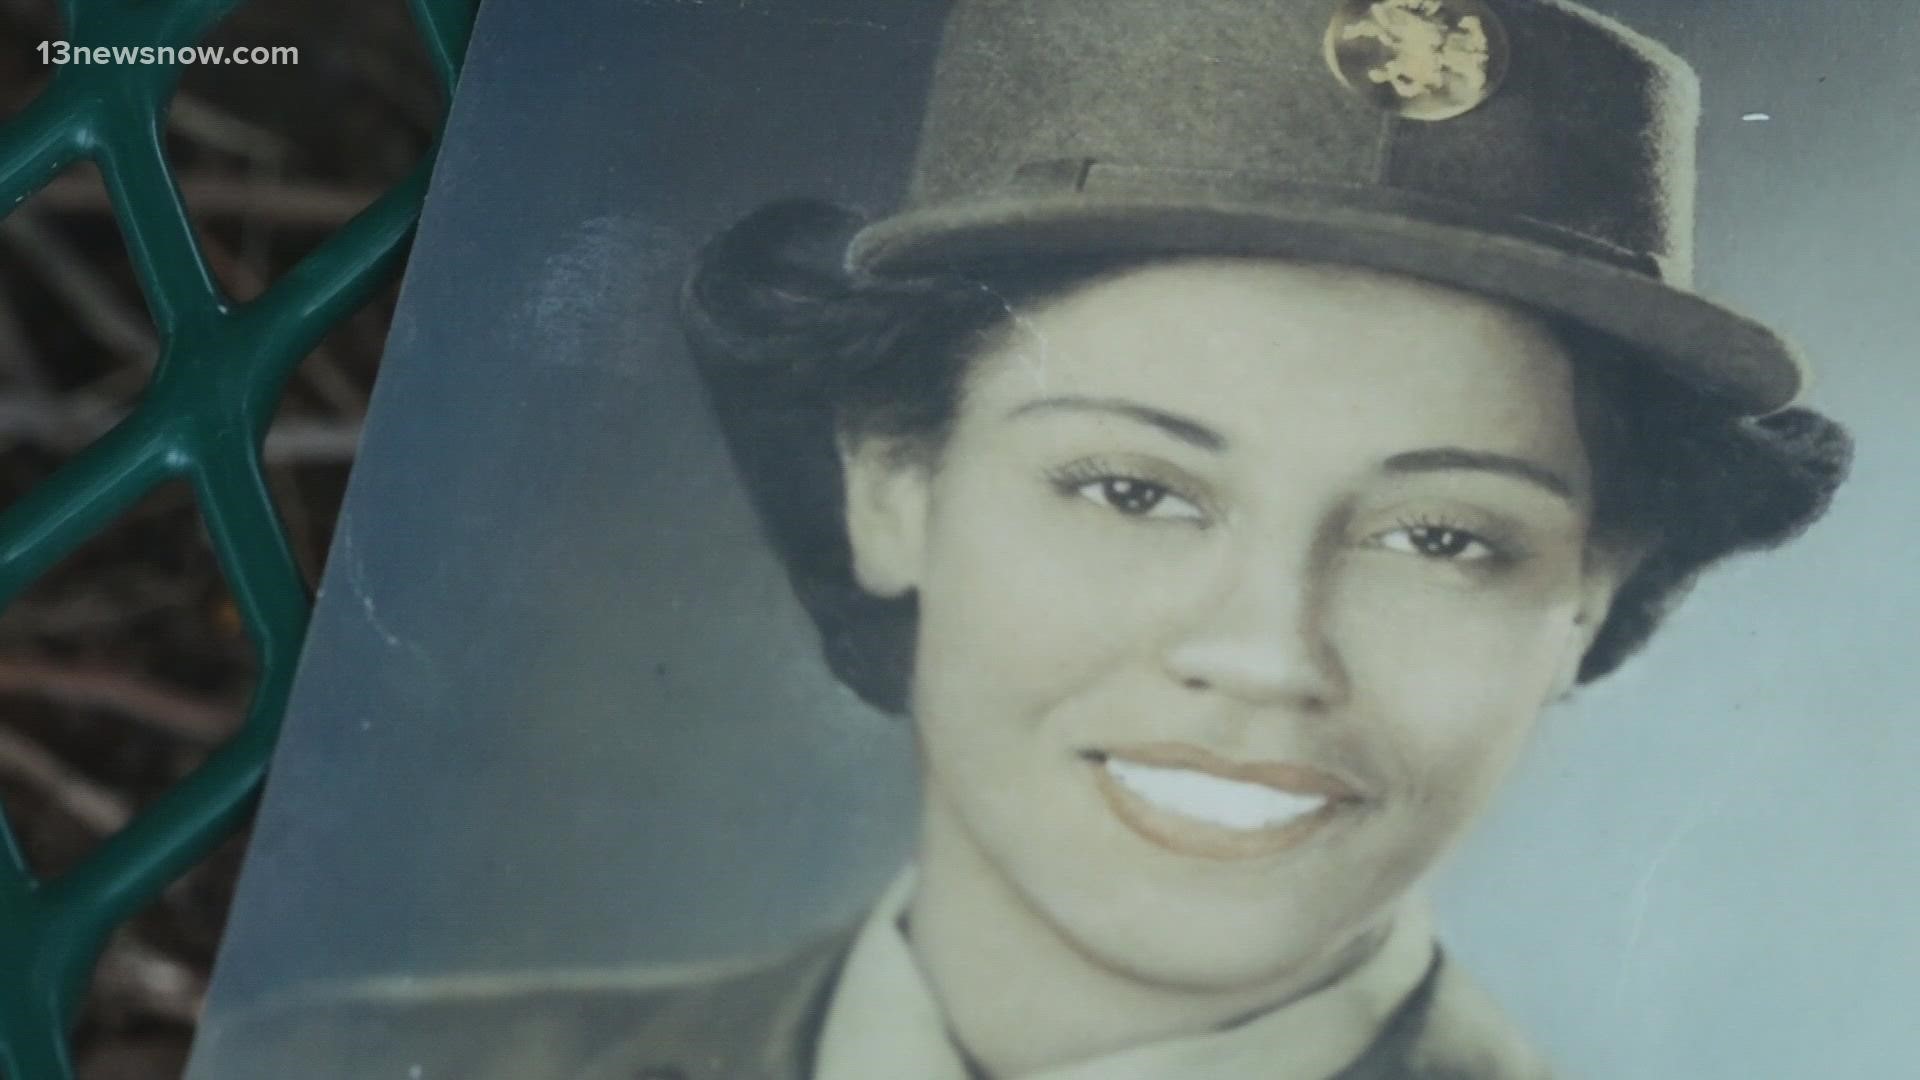 The 6888th Central Post Directory Battalion was made up of 855 Black women during World War II. It took decades for these women to receive high recognition.